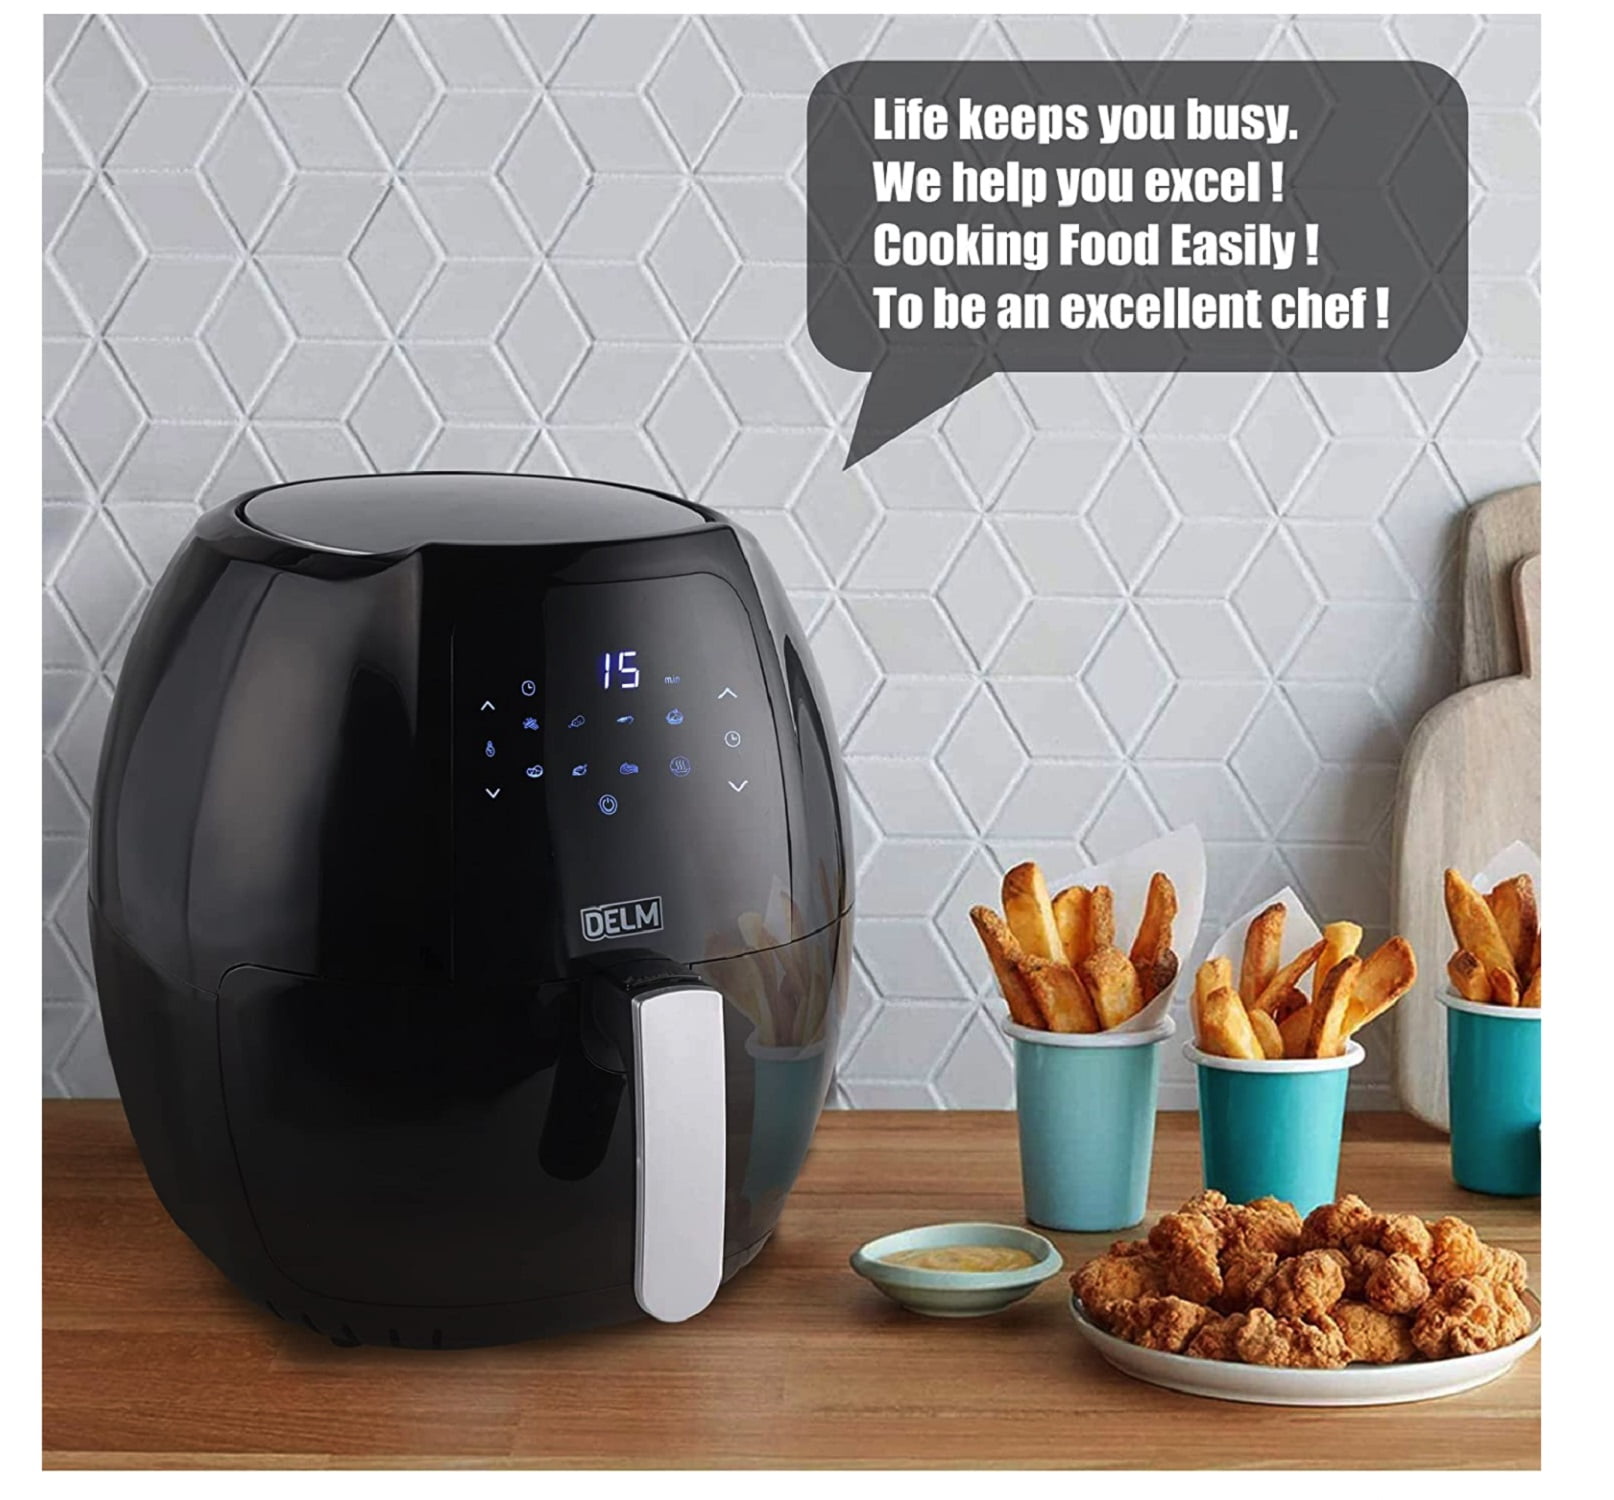  Air Fryer XL 8Qt, Dreamiracle Digital Airfryer 8 quart, 1750W  Smart Air Fryer with 10 Presets One Touch LED Screen, Nonstick Detachable  Basket, Preheat, Auto Shut Off, Rapid Frying : Home